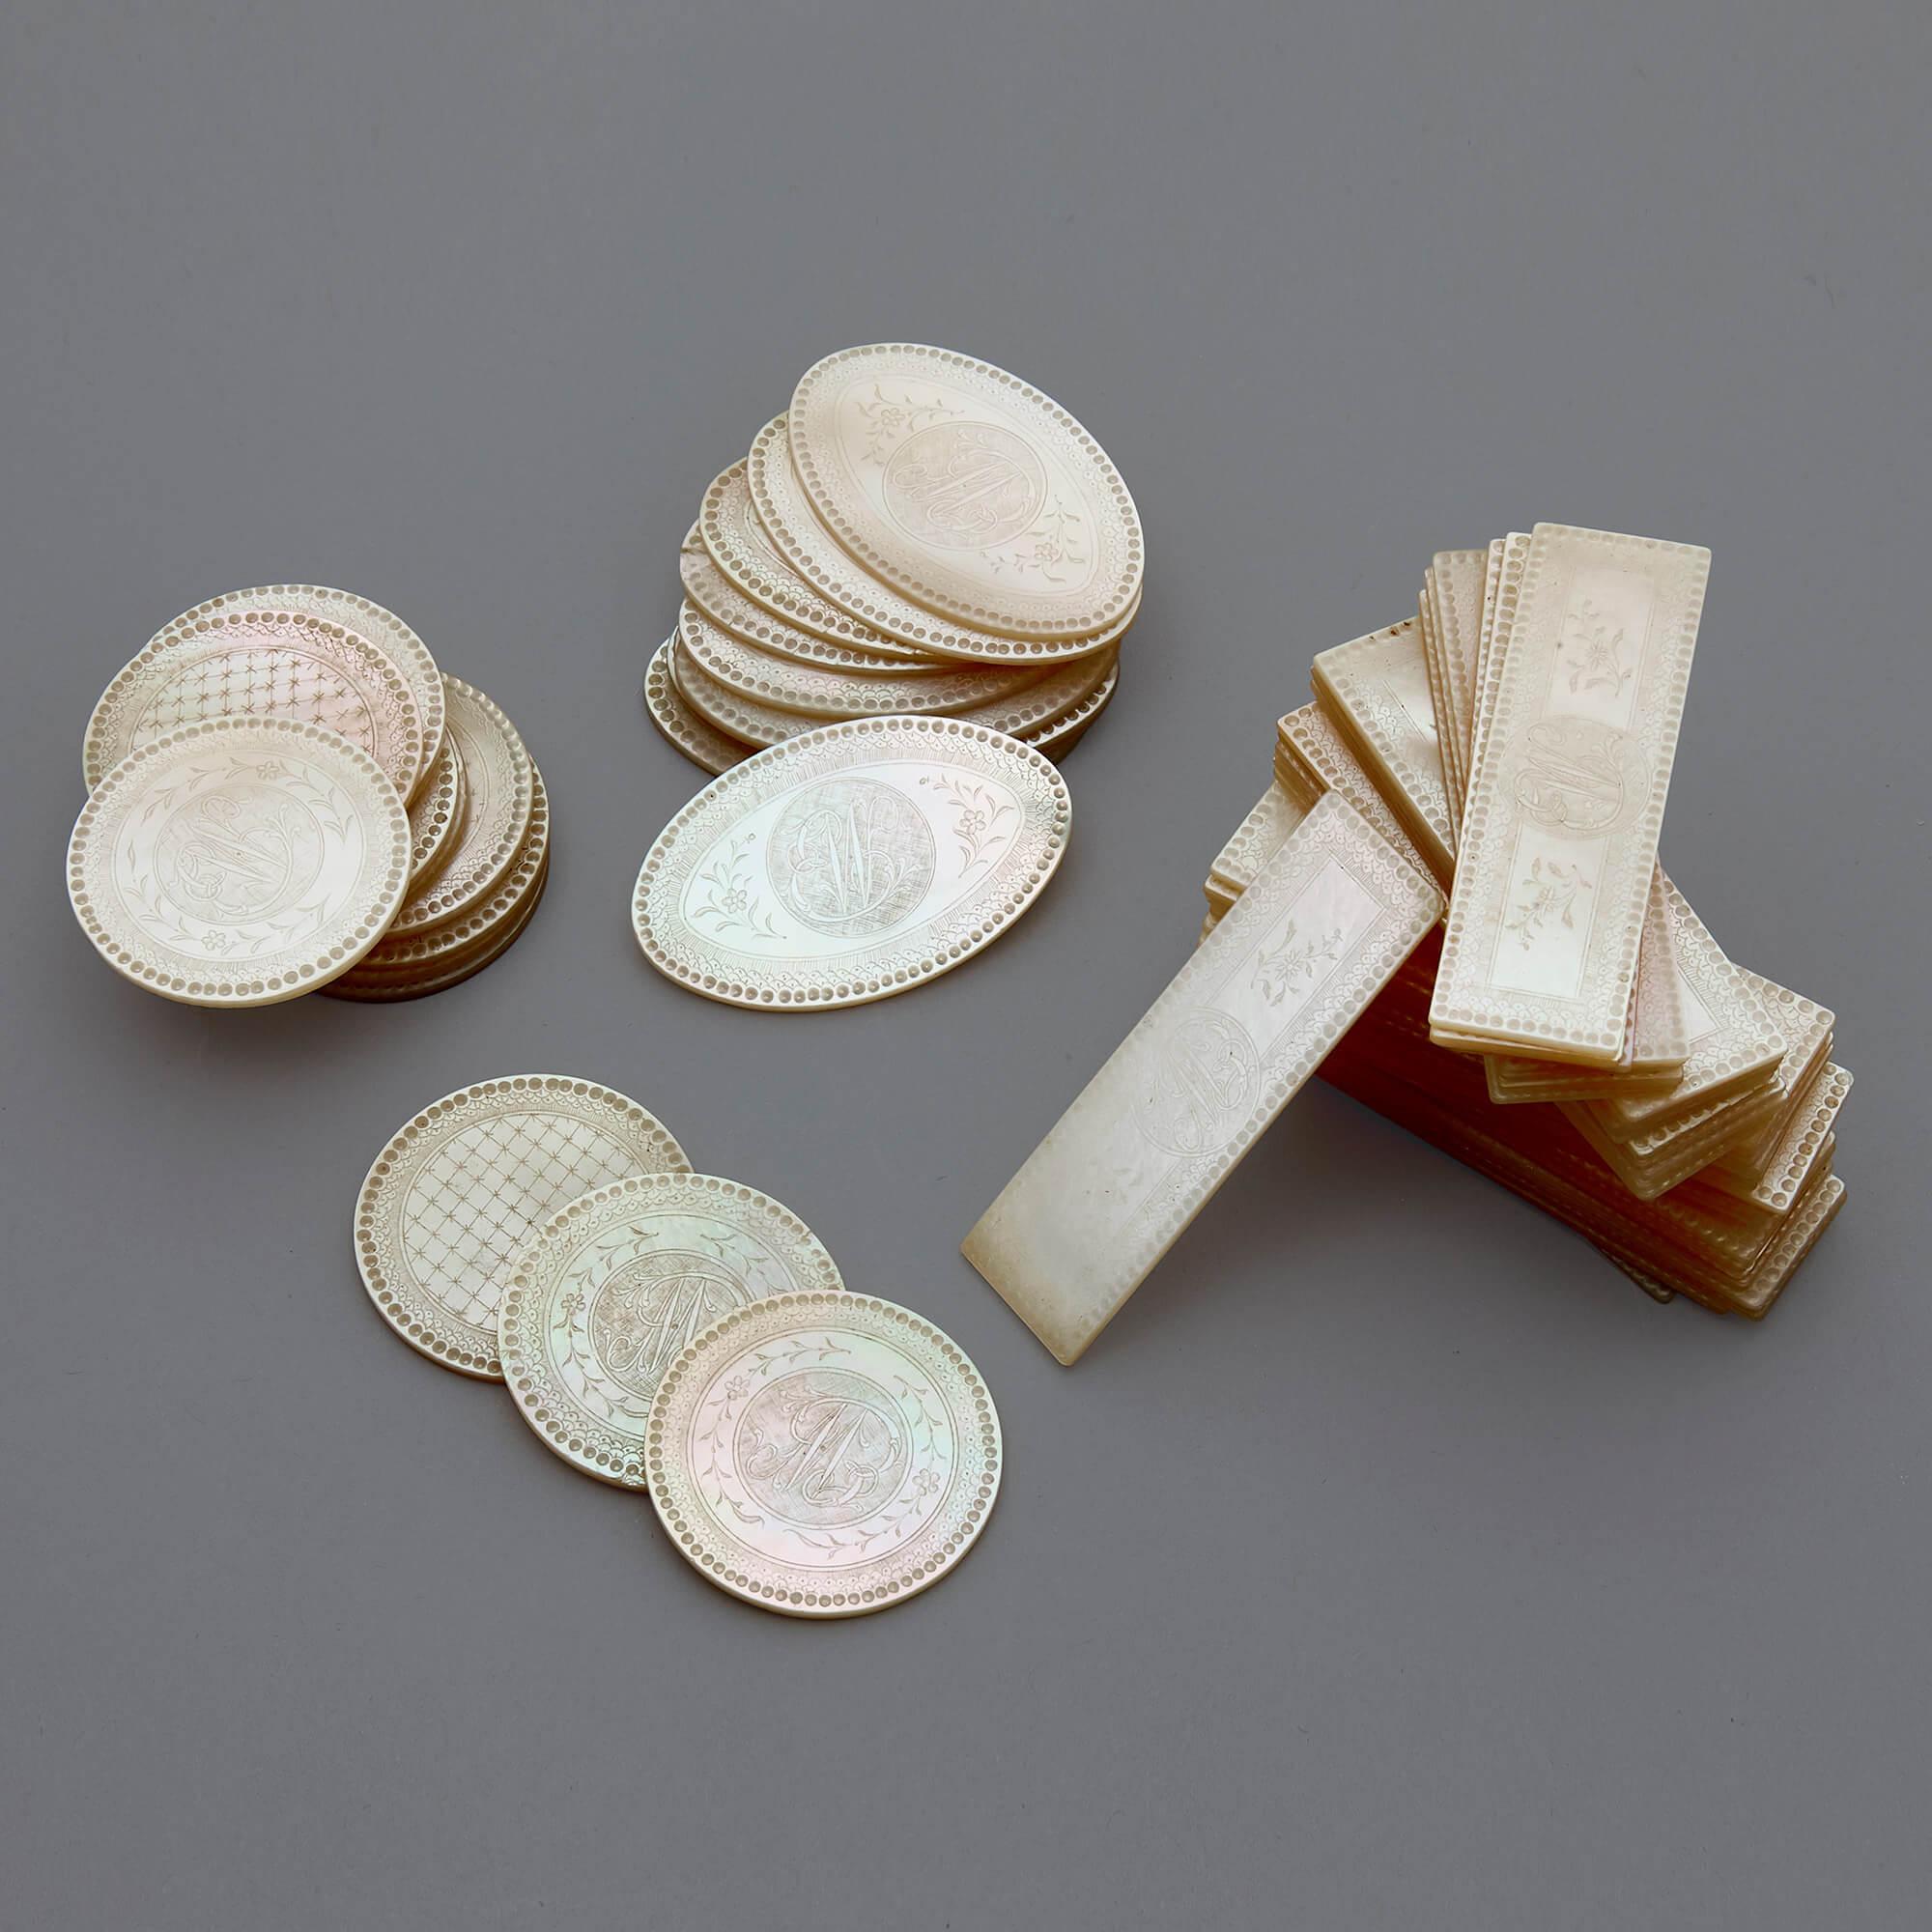 Set of 63 Qing Dynasty Chinese mother of pearl counters
Chinese, early 19th century
Measure: Diameter 3.5cm

This set comprises sixty-three mother of pearl gaming counters from the Qing dynasty. There are thirty-nine rectangular counters,